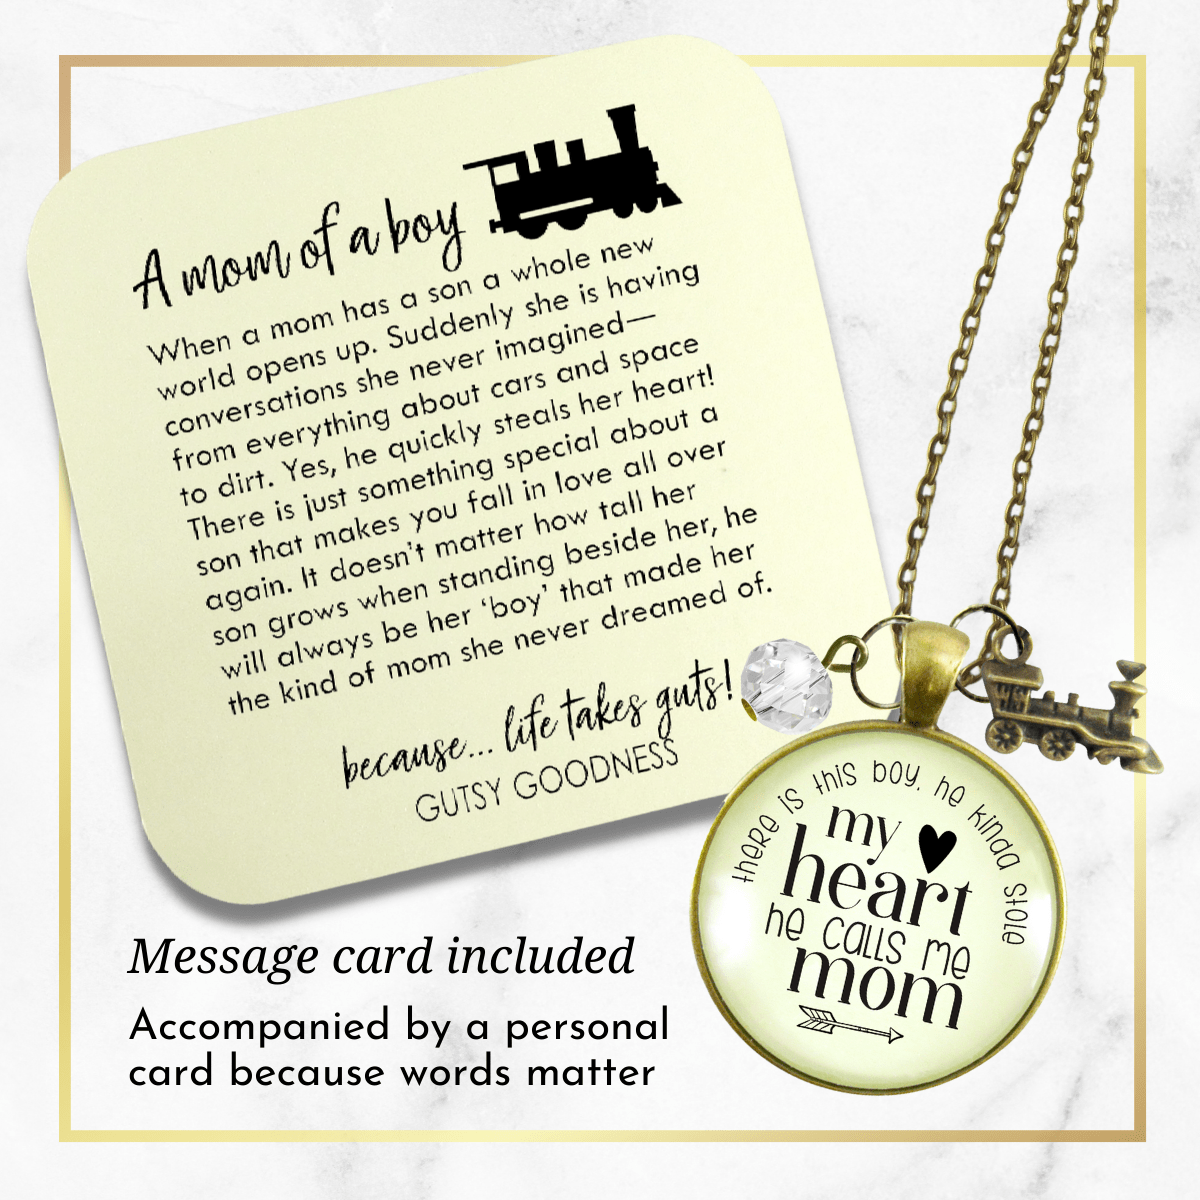 Gutsy Goodness Mom of Son Necklace This Boy He Kinda Stole My Heart Train Motherhood Jewelry - Gutsy Goodness Handmade Jewelry;Mom Of Son Necklace This Boy He Kinda Stole My Heart Train Motherhood Jewelry - Gutsy Goodness Handmade Jewelry Gifts